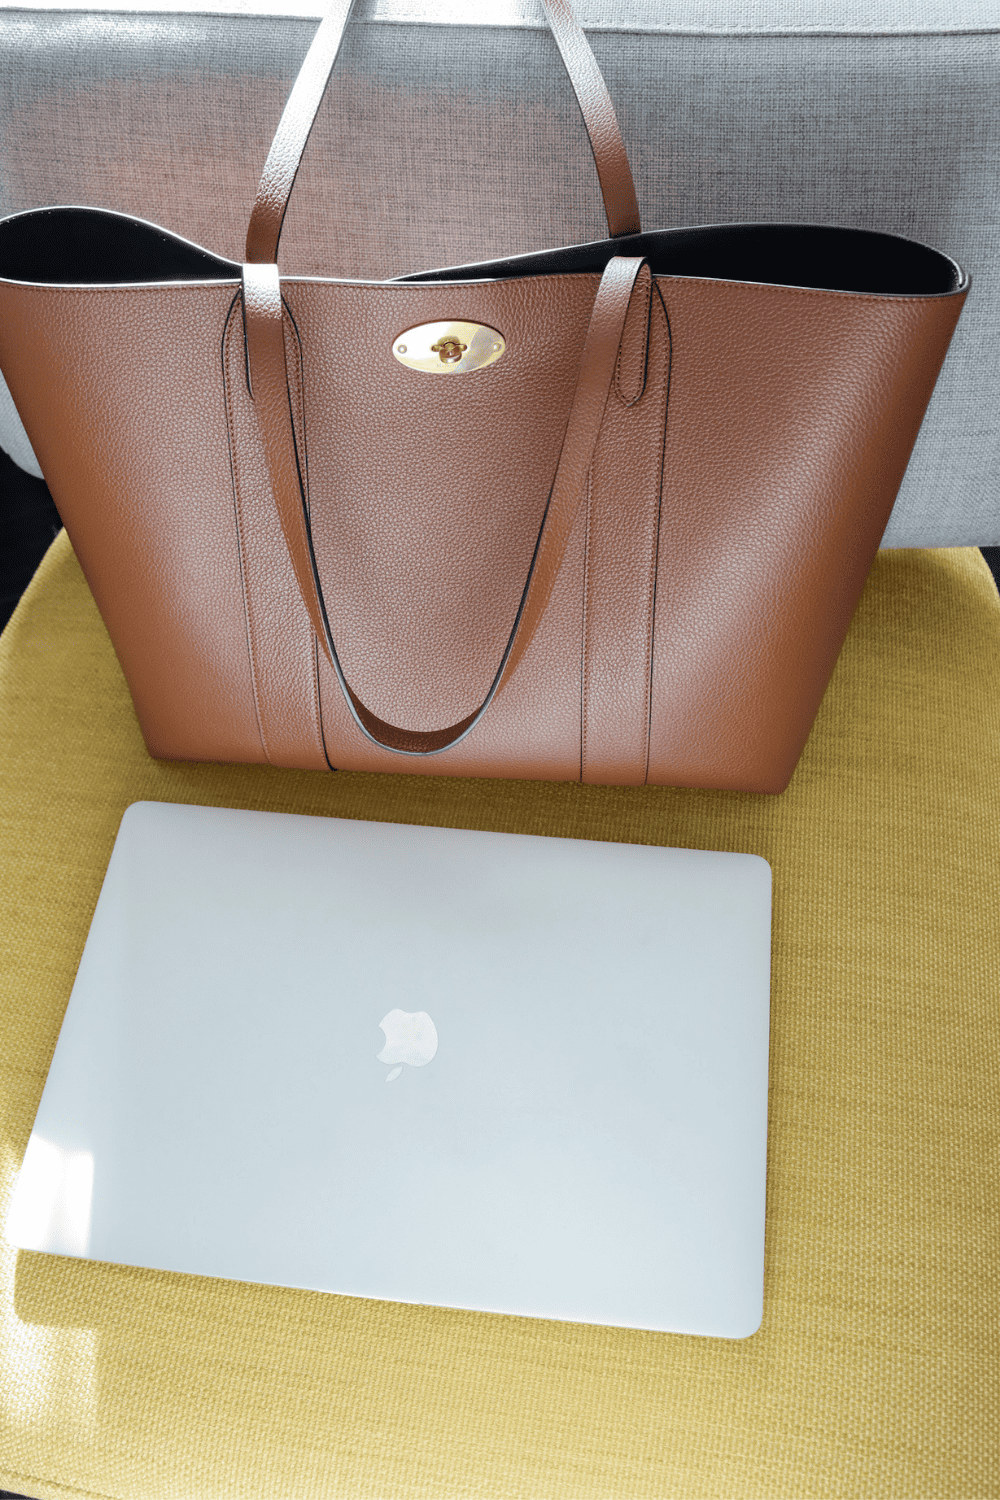 Laptop & Mulberry Tote